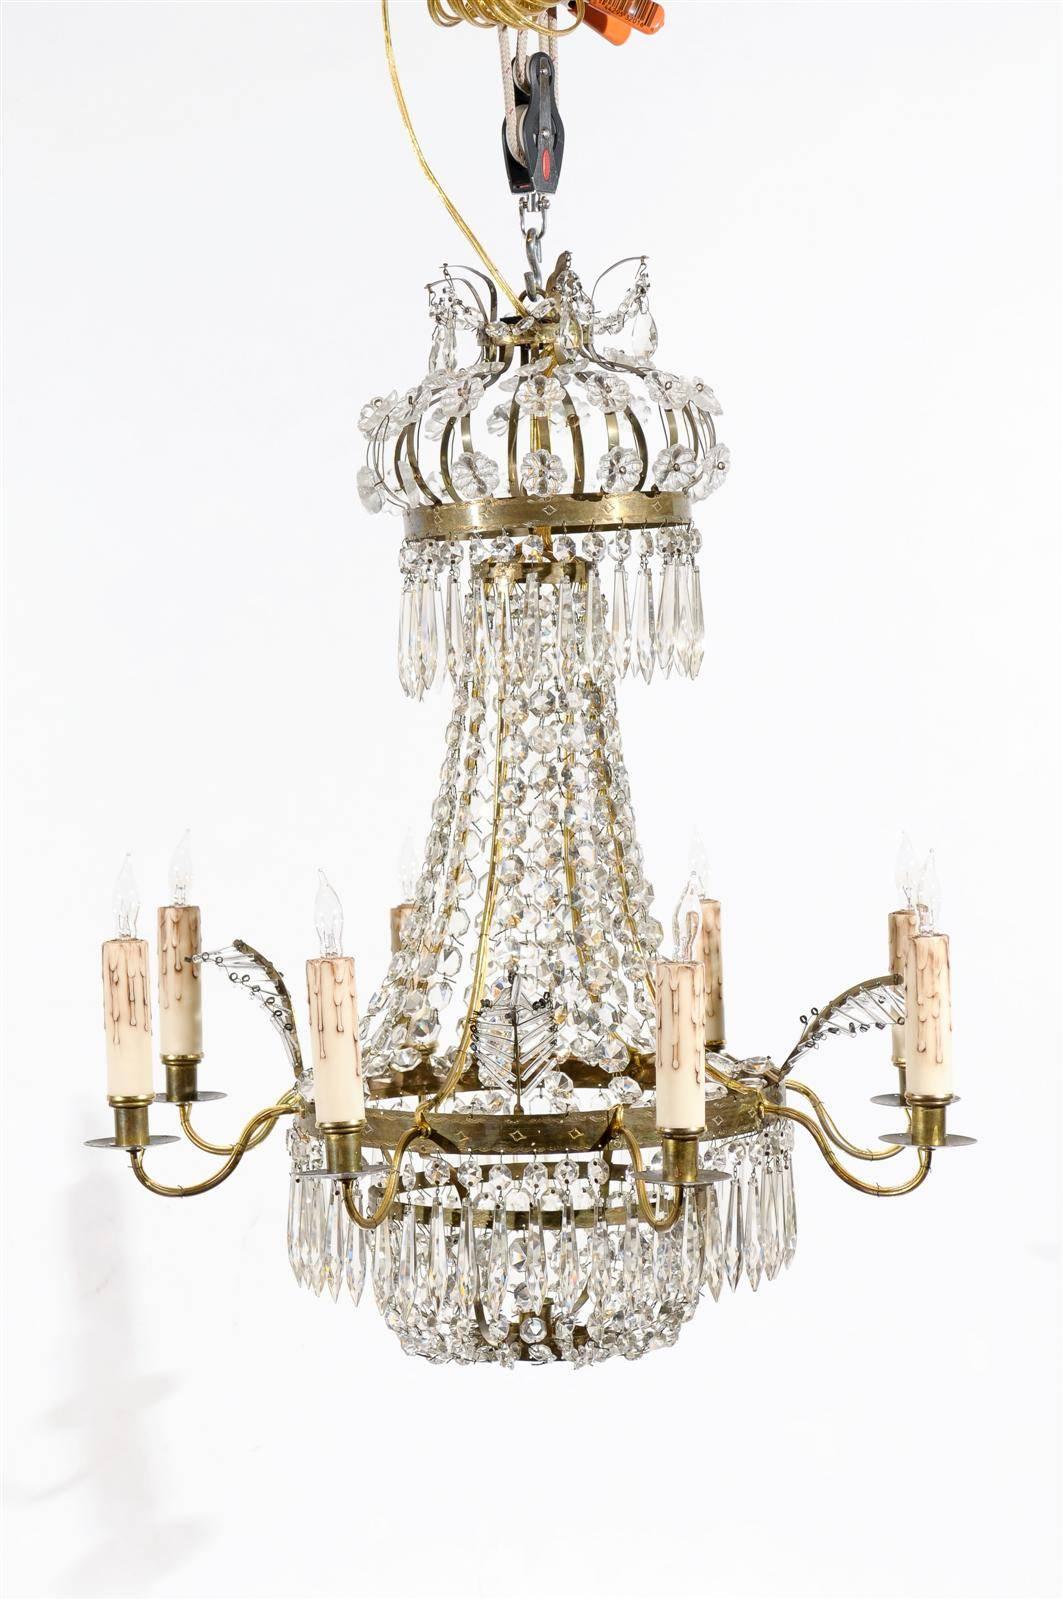 A petite swedish crystal and brass chandelier in basket form with 6 lights. 

William Word Fine Antiques: Atlanta's source for antique interiors since 1936.